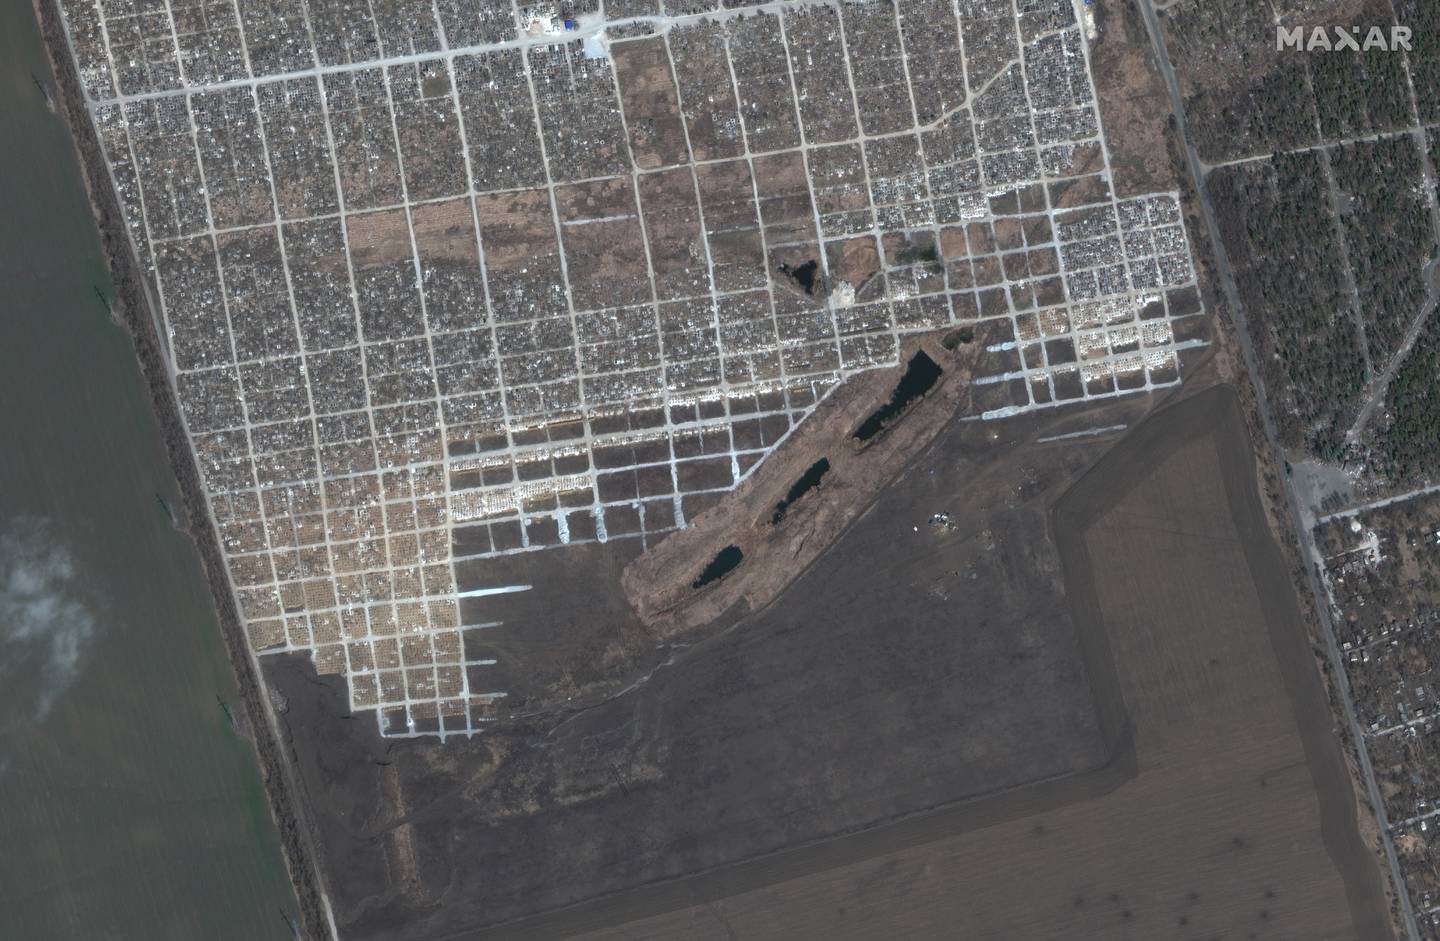 Satellite image shows a cemetery in Mariupol, Ukraine, March 29, 2022.